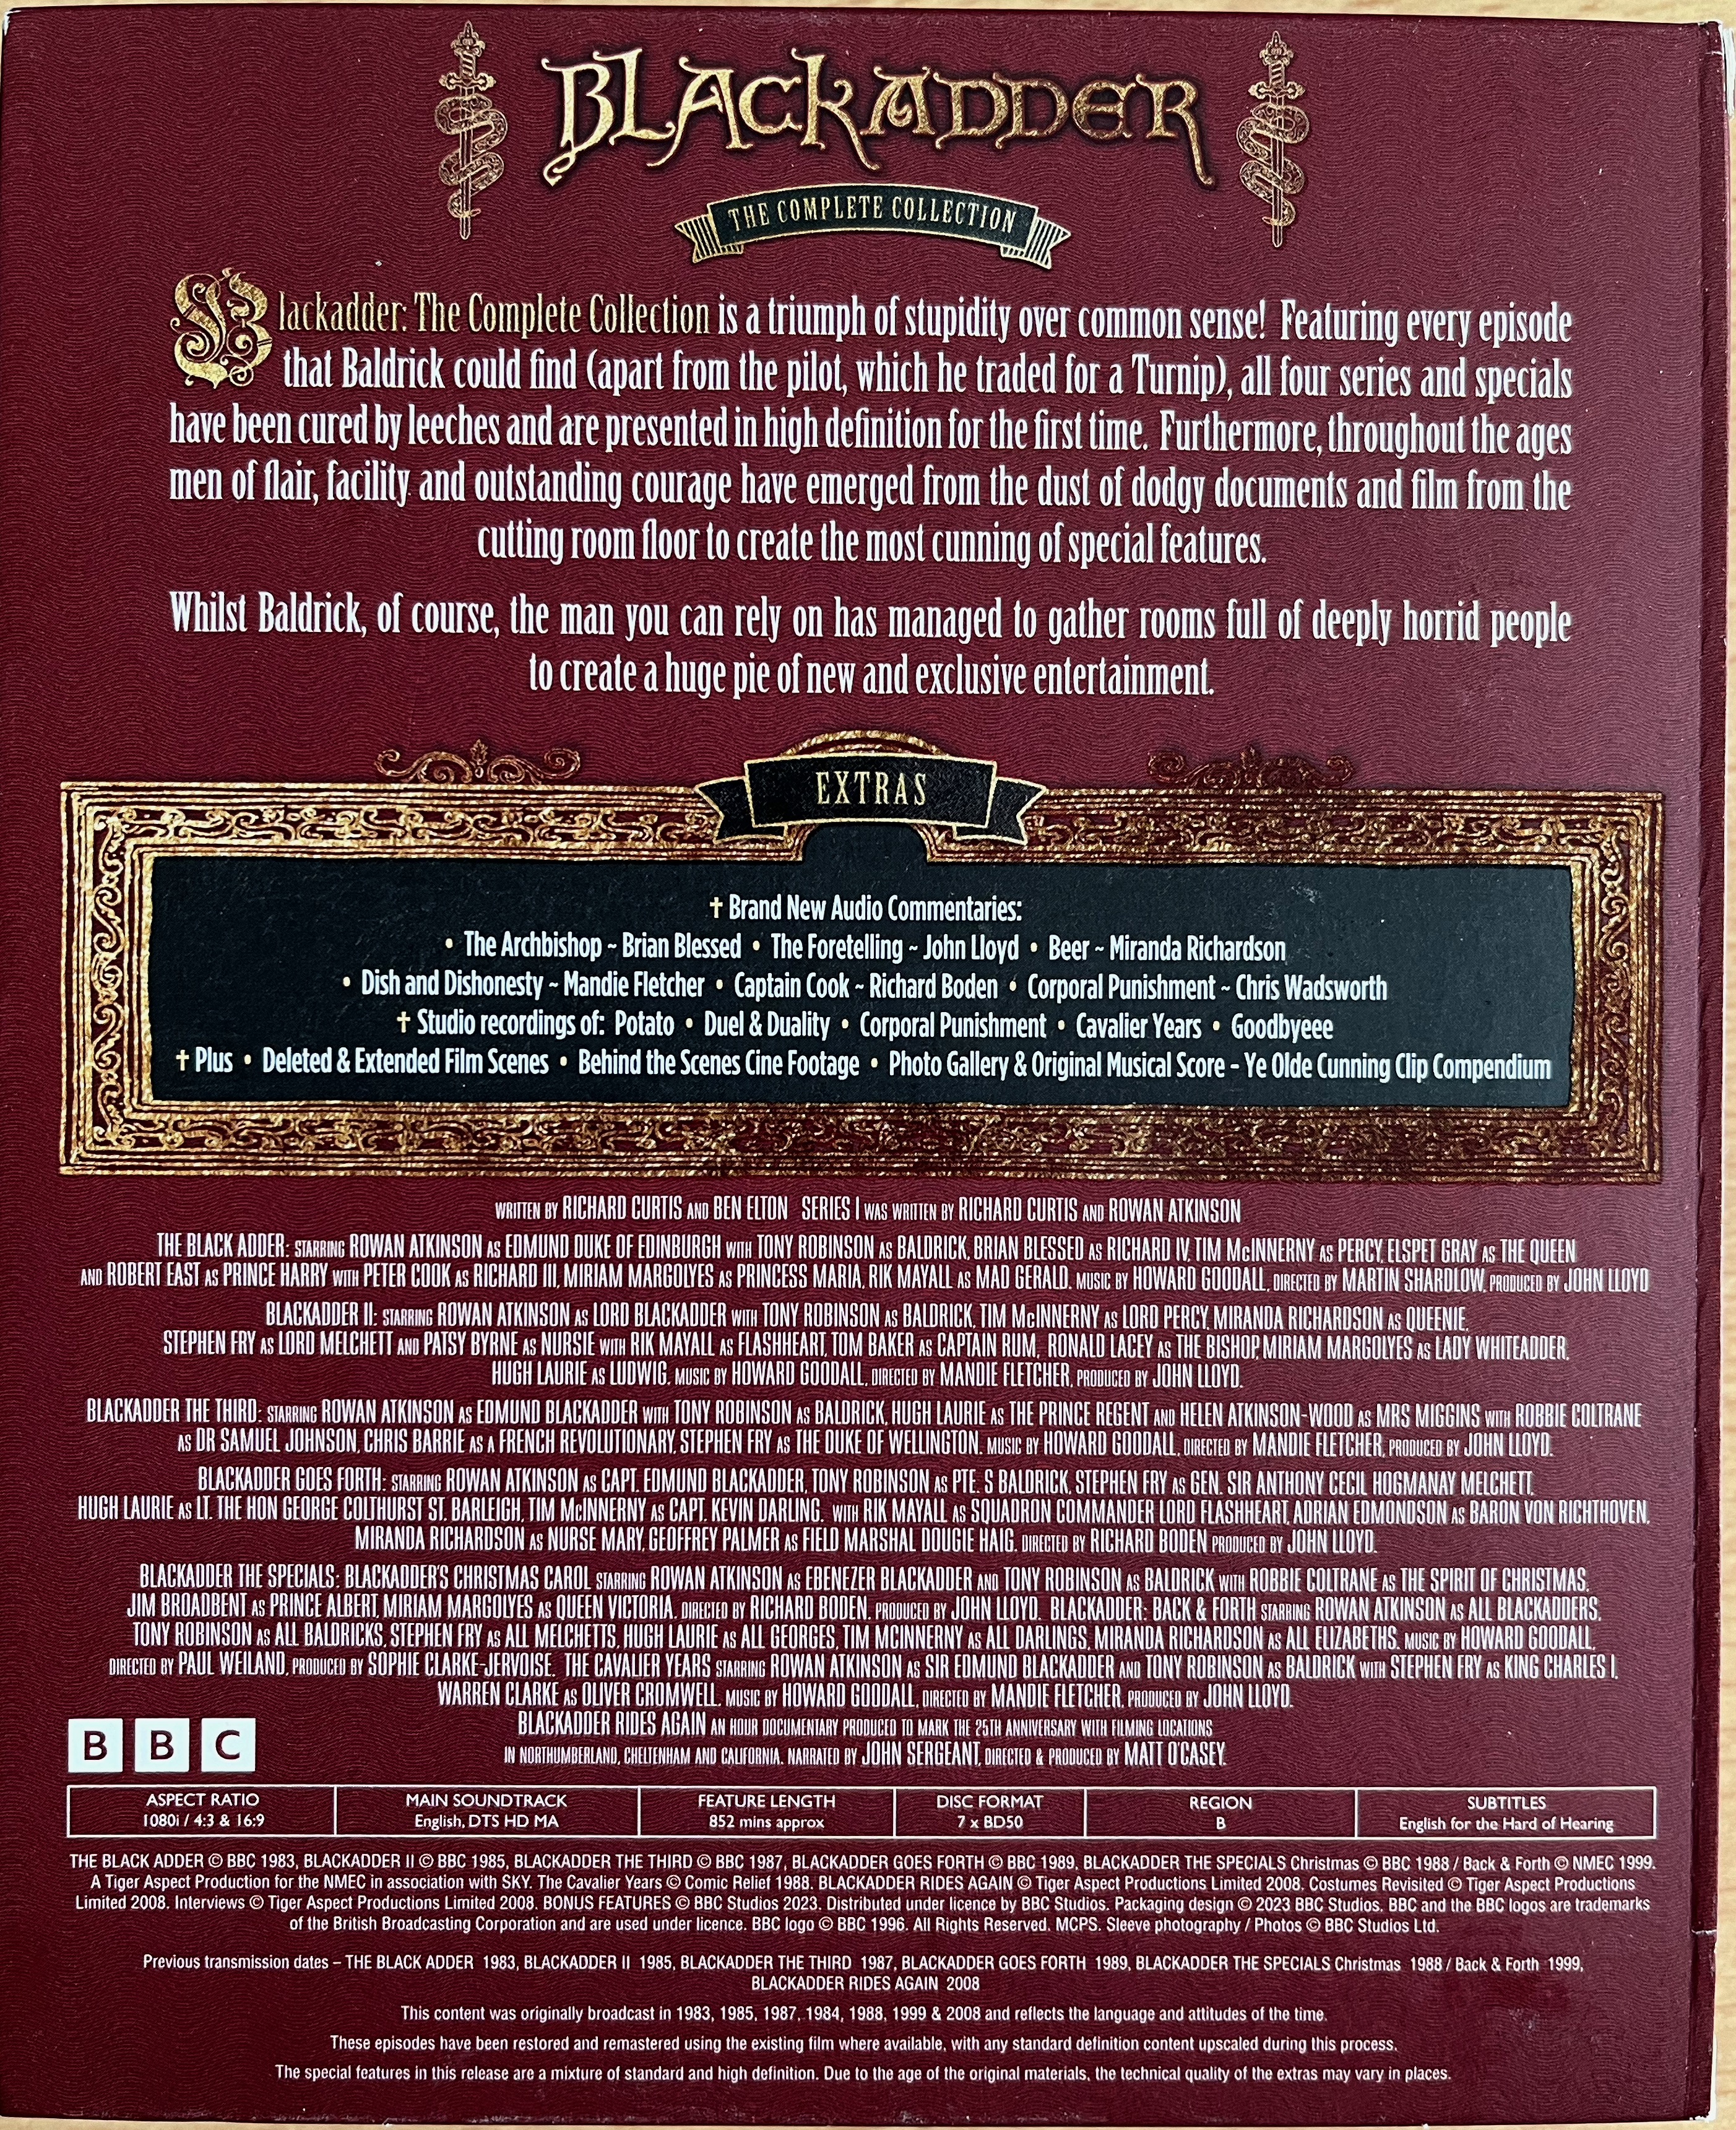 Back cover of the Blackadder 40th anniversary Blu-ray set, with a brief description of the series, a list of the new extras, and credits for the series and specials.